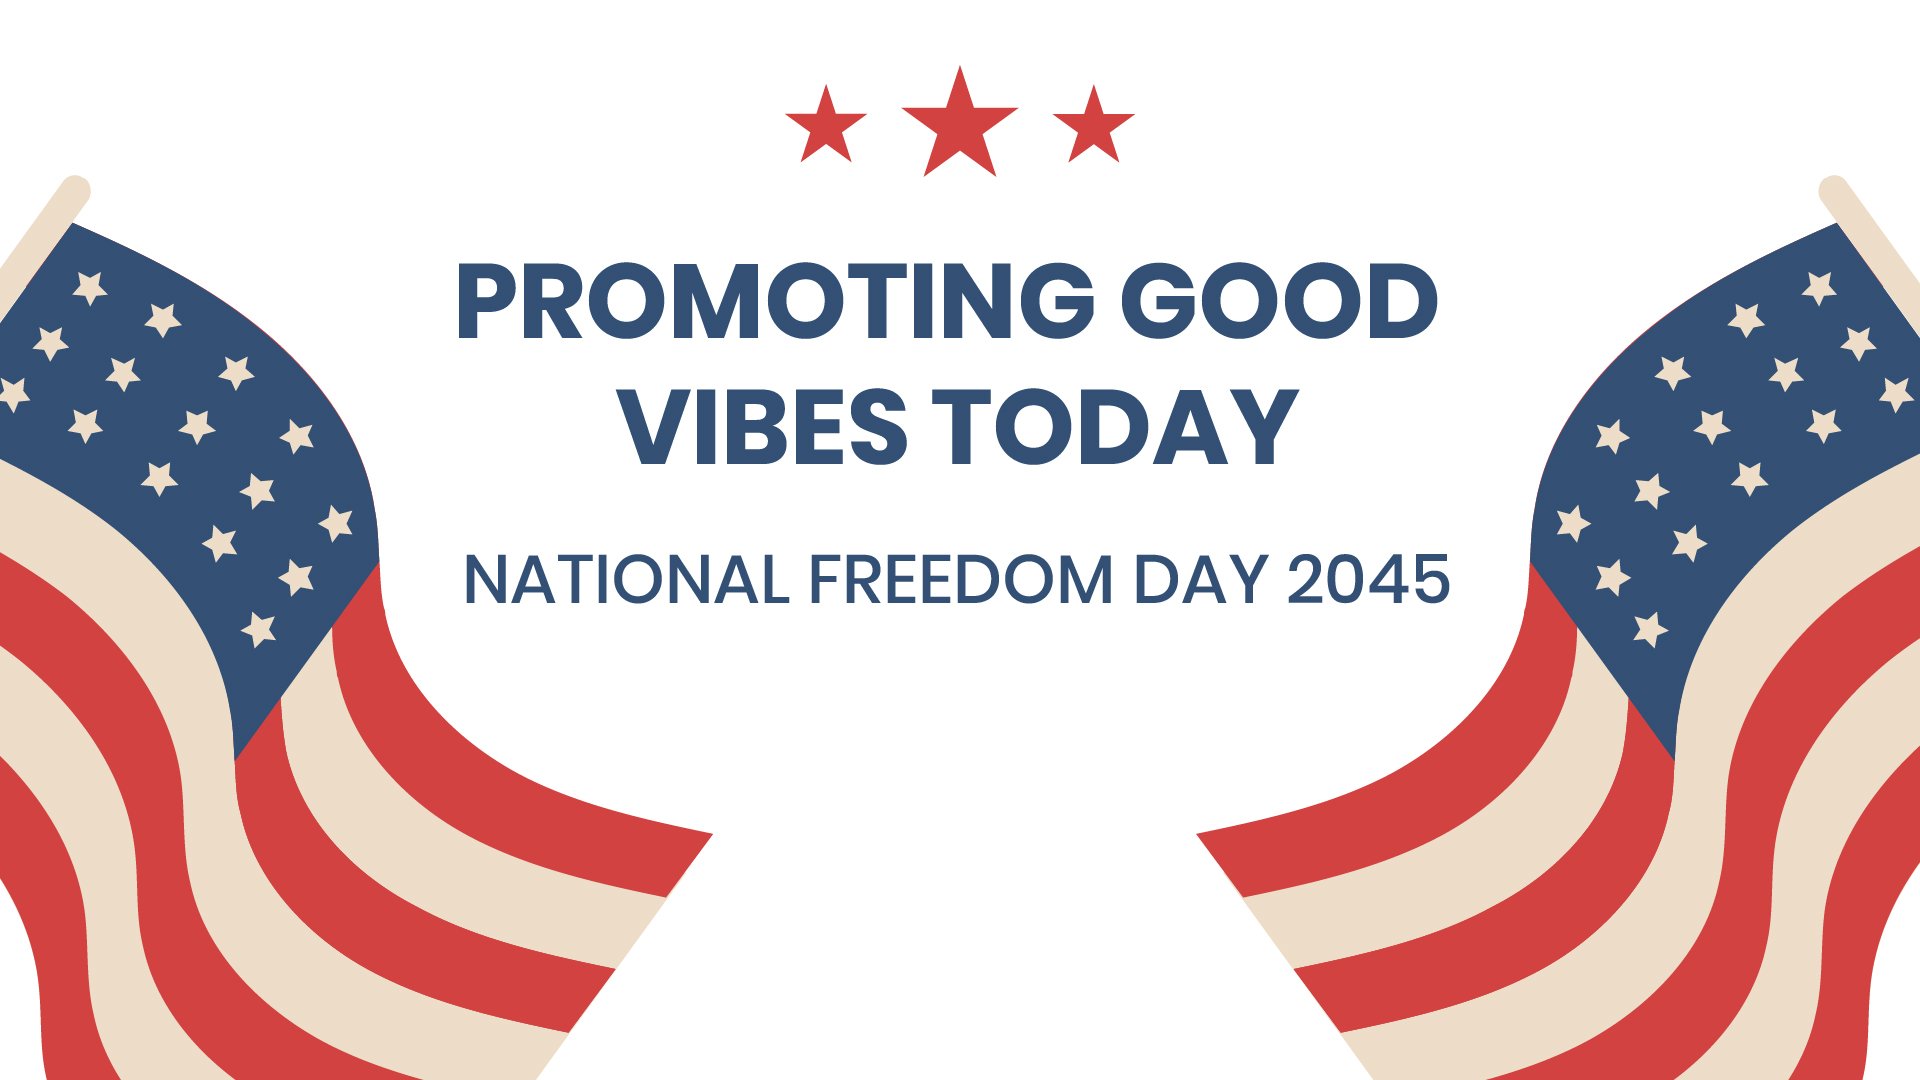 Free National Freedom Day Greeting Card Background in PDF, Illustrator, PSD, EPS, SVG, JPG, PNG